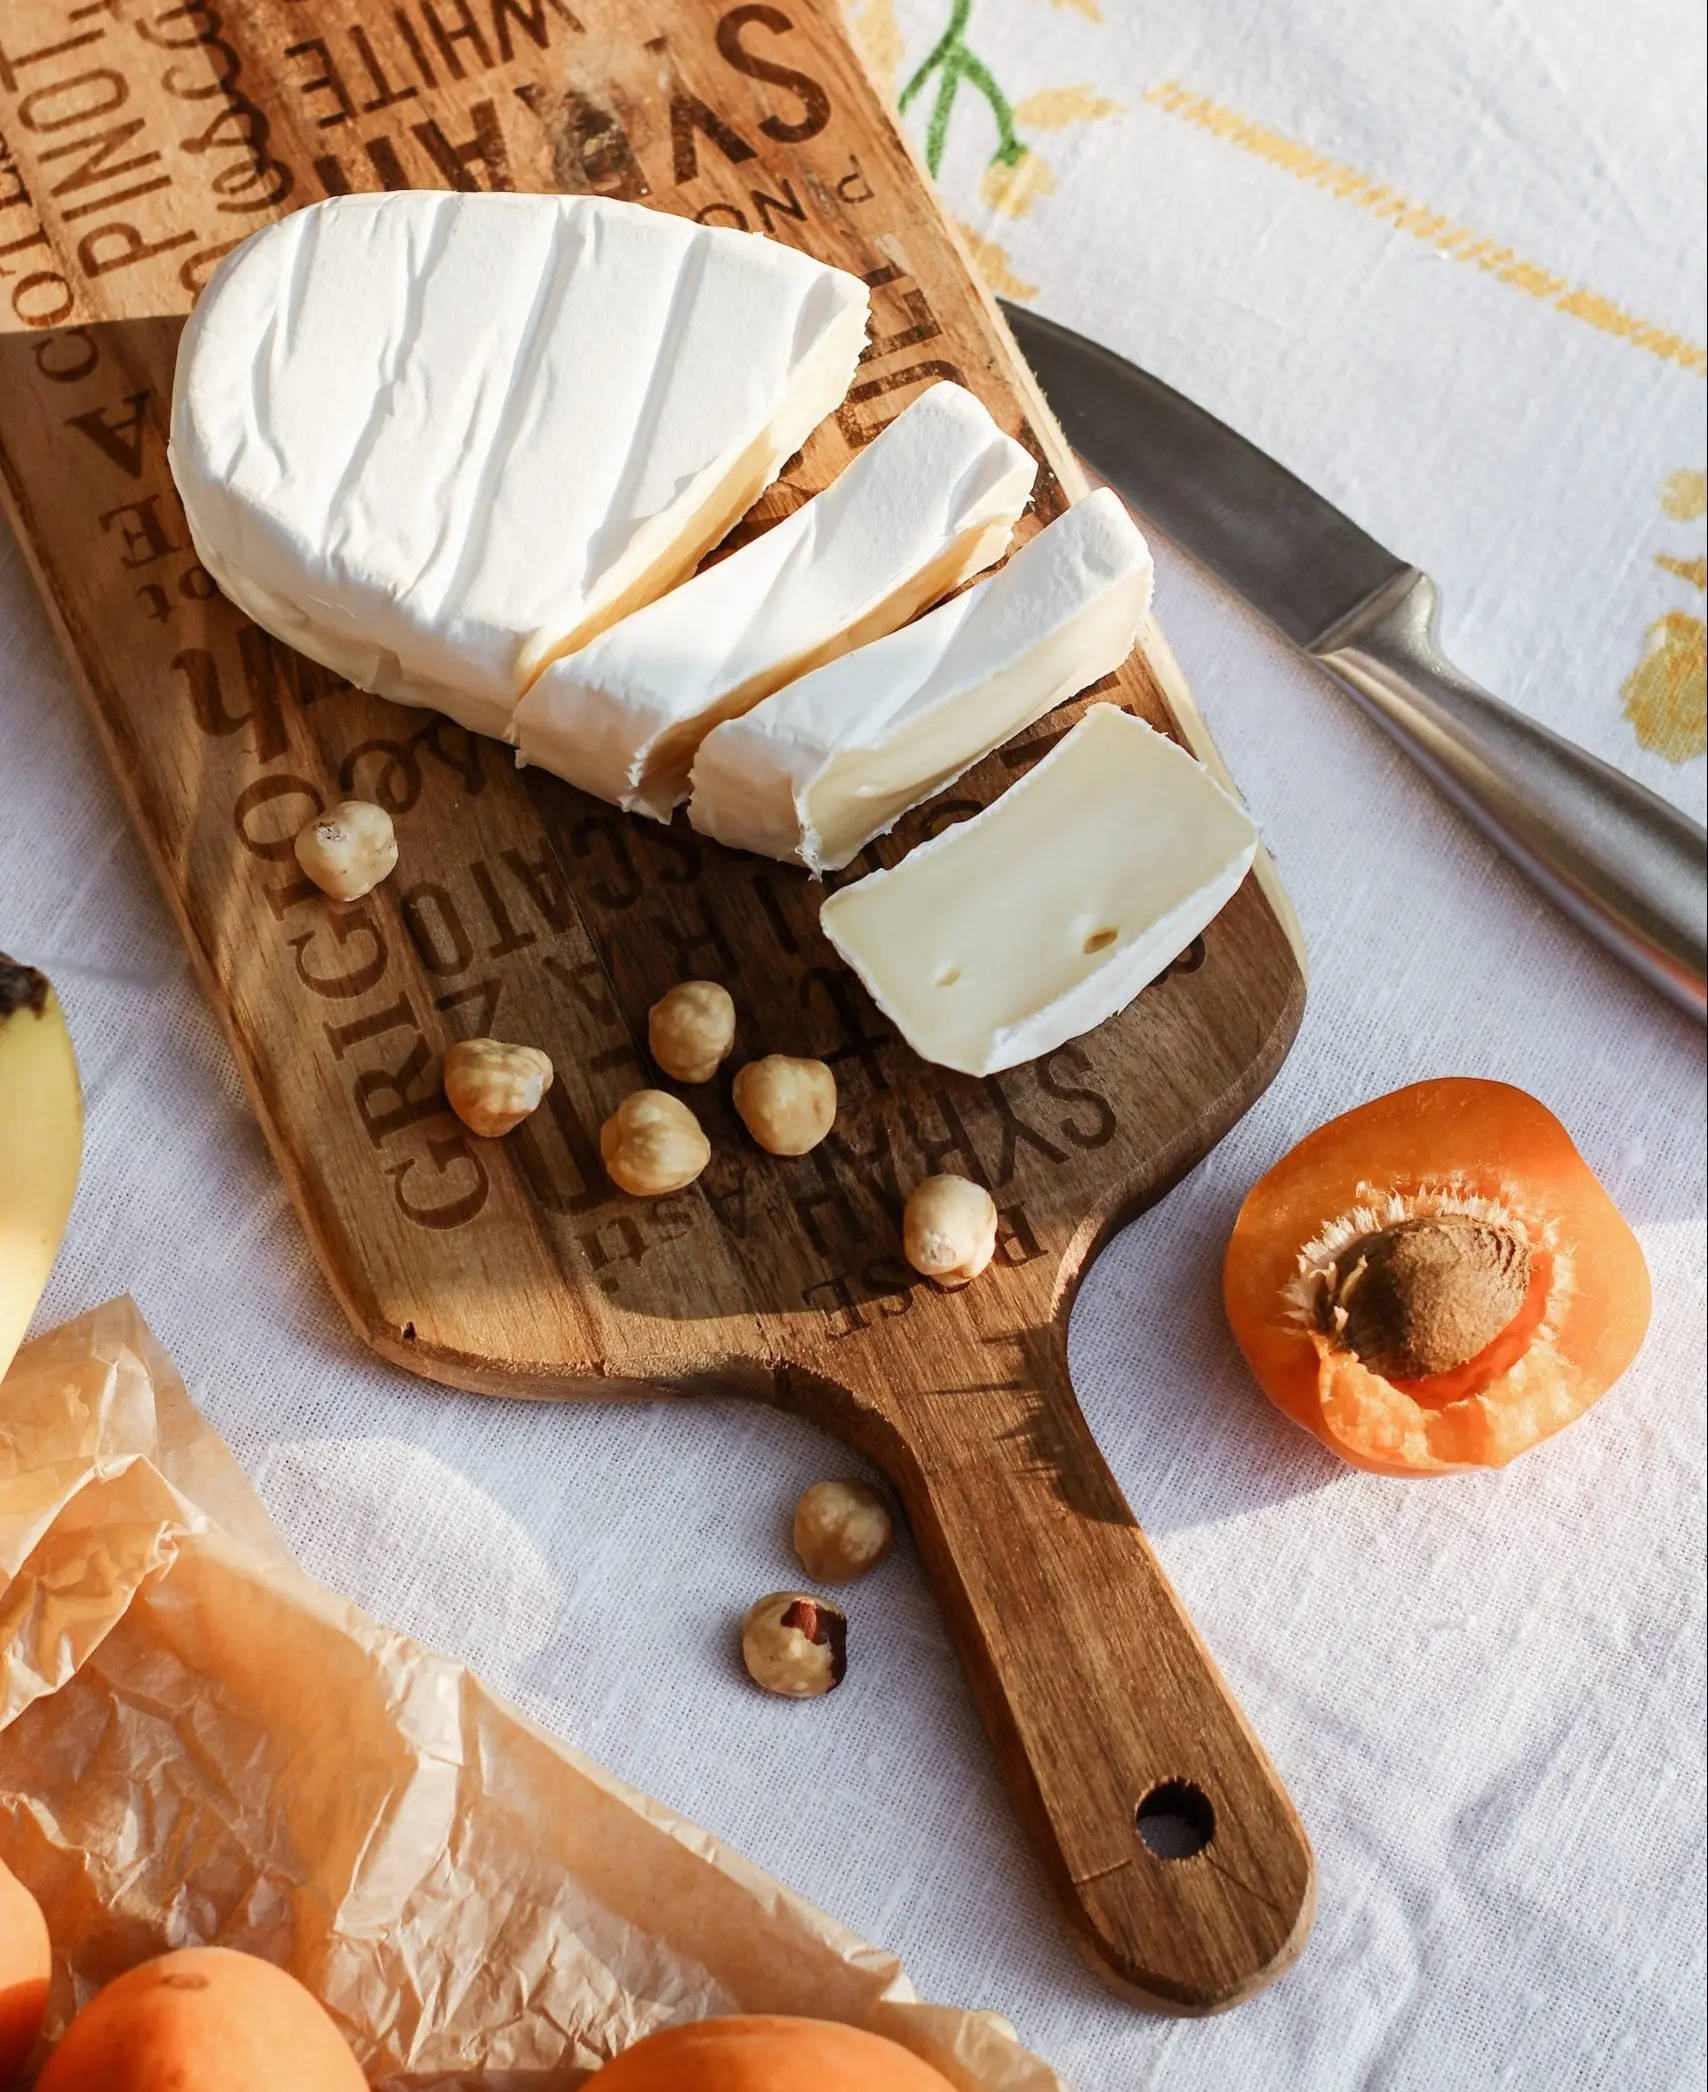 smoked brie - Is camembert the same as brie